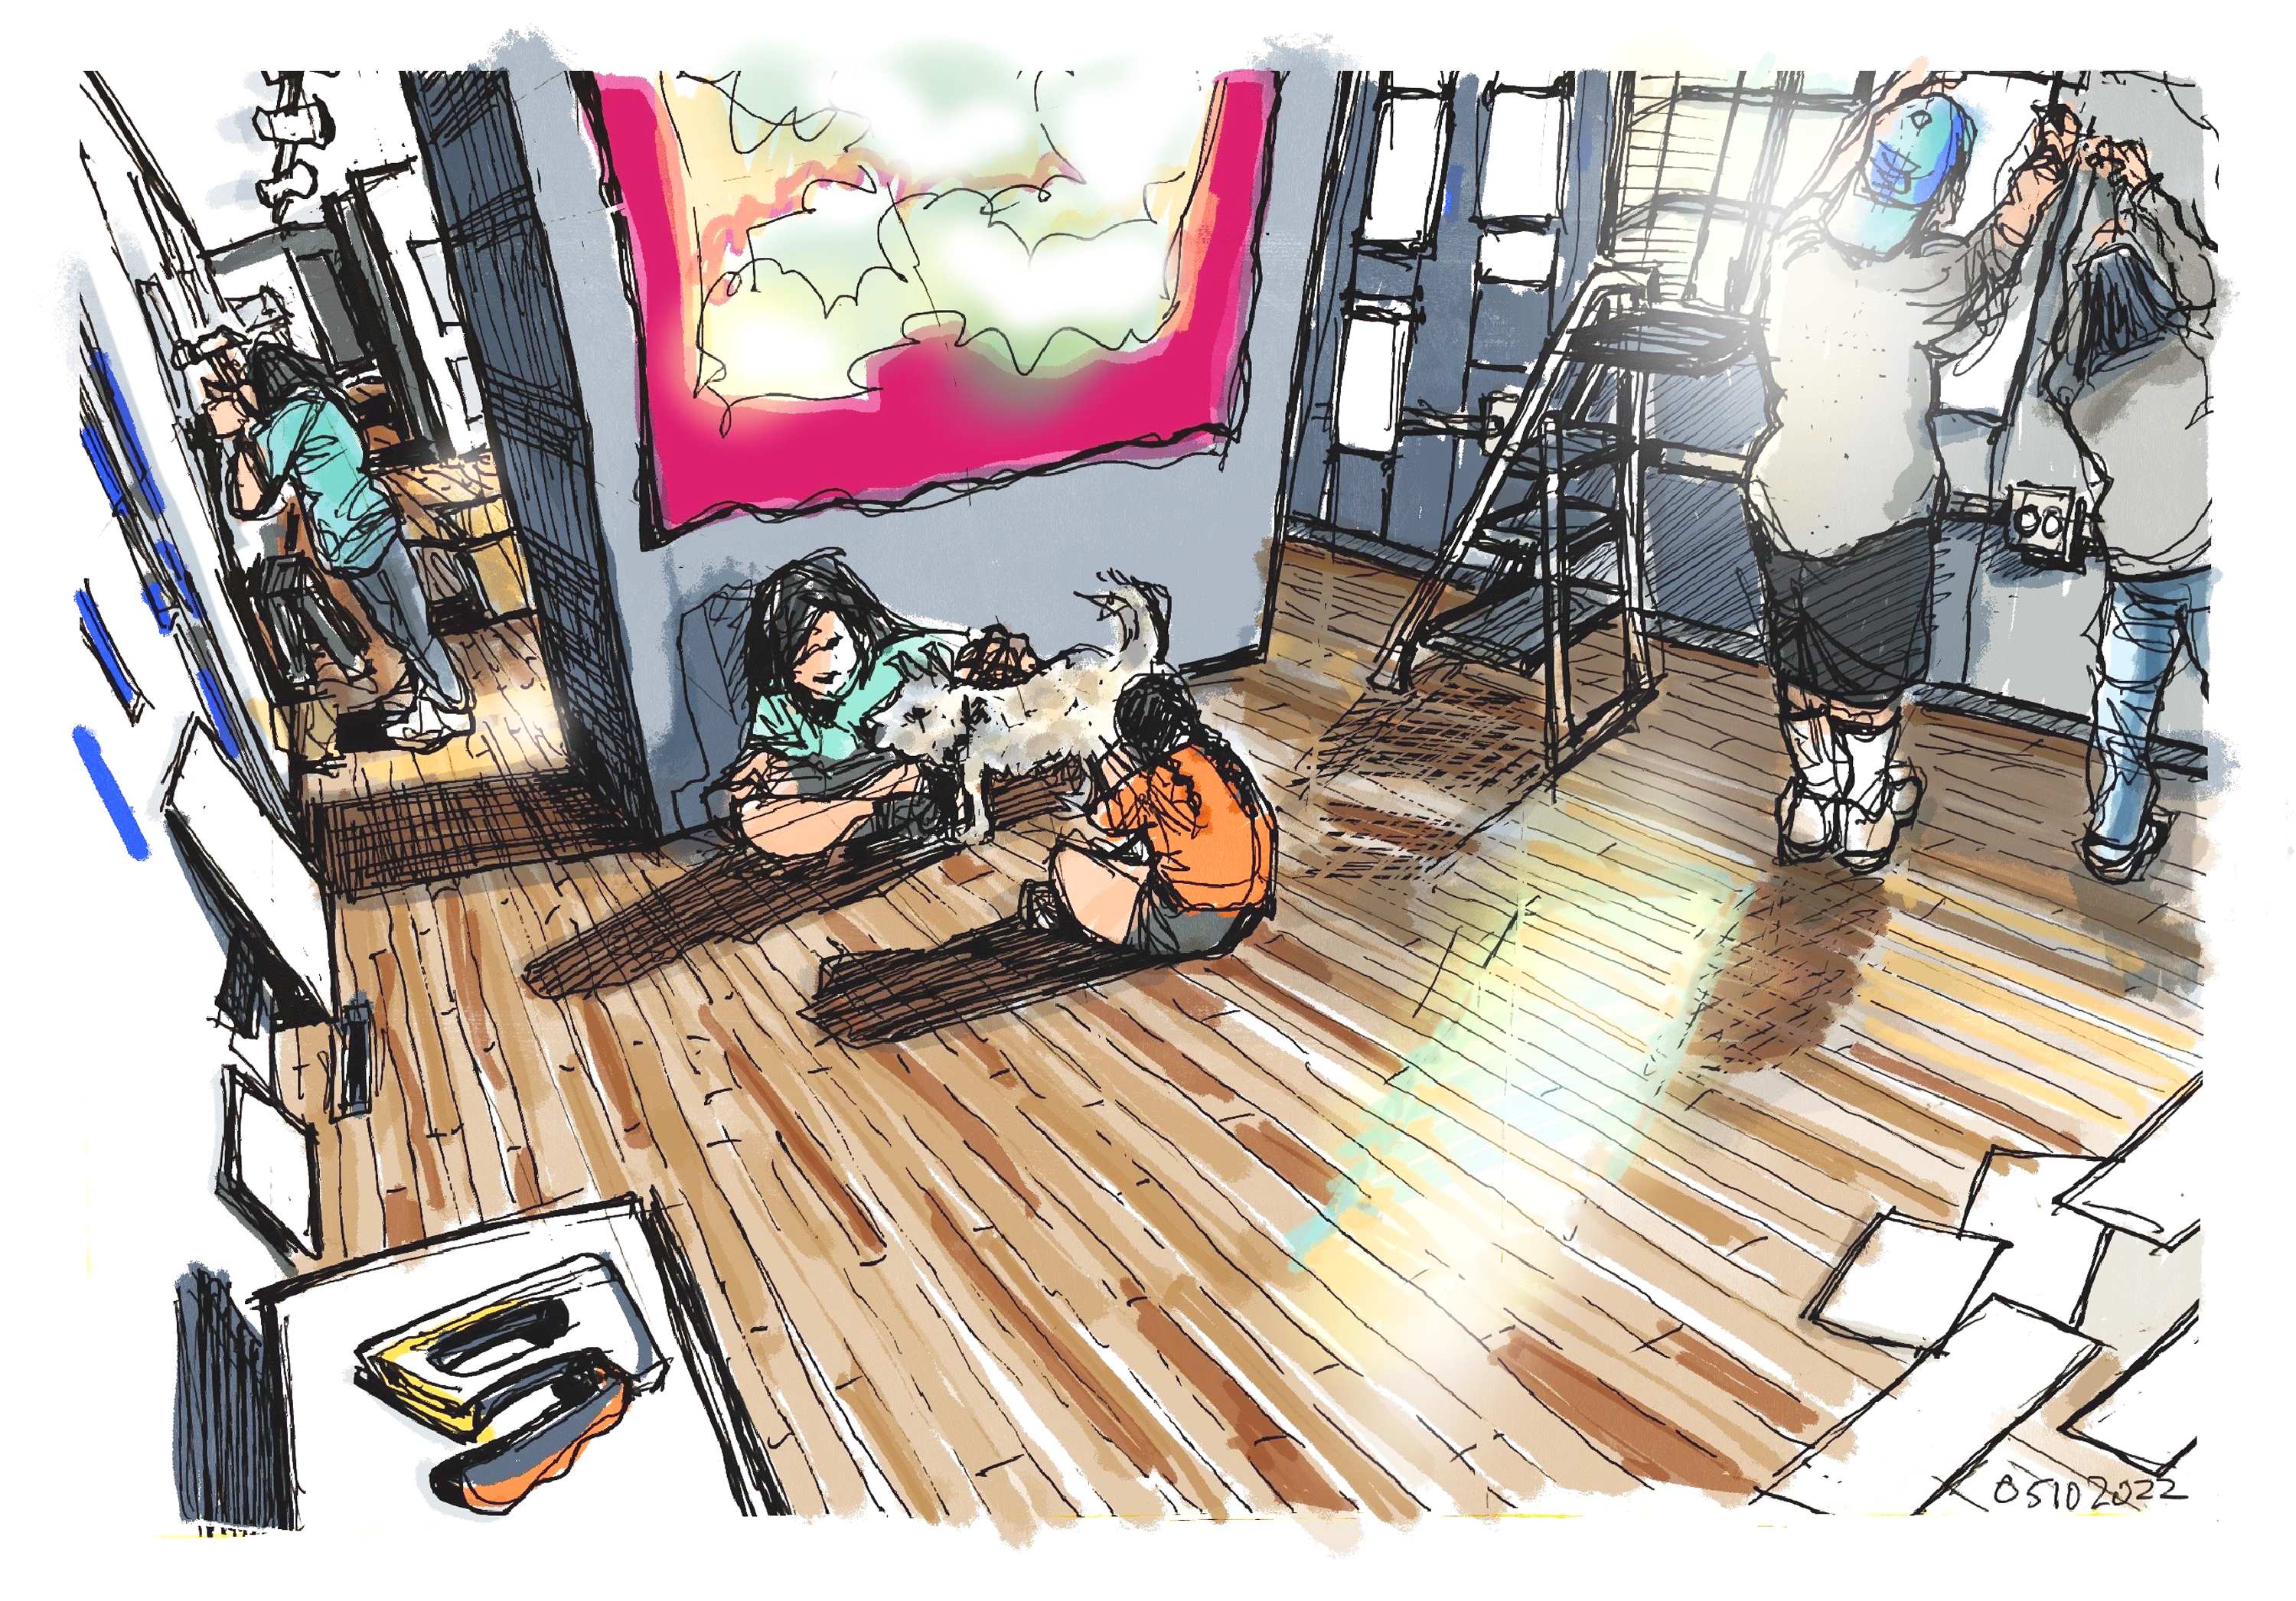 Ink and then digital color sketch of the interior of the armory gallery. Seniors are hanging their art while a couple of students pet Pickles. Light shines through a window